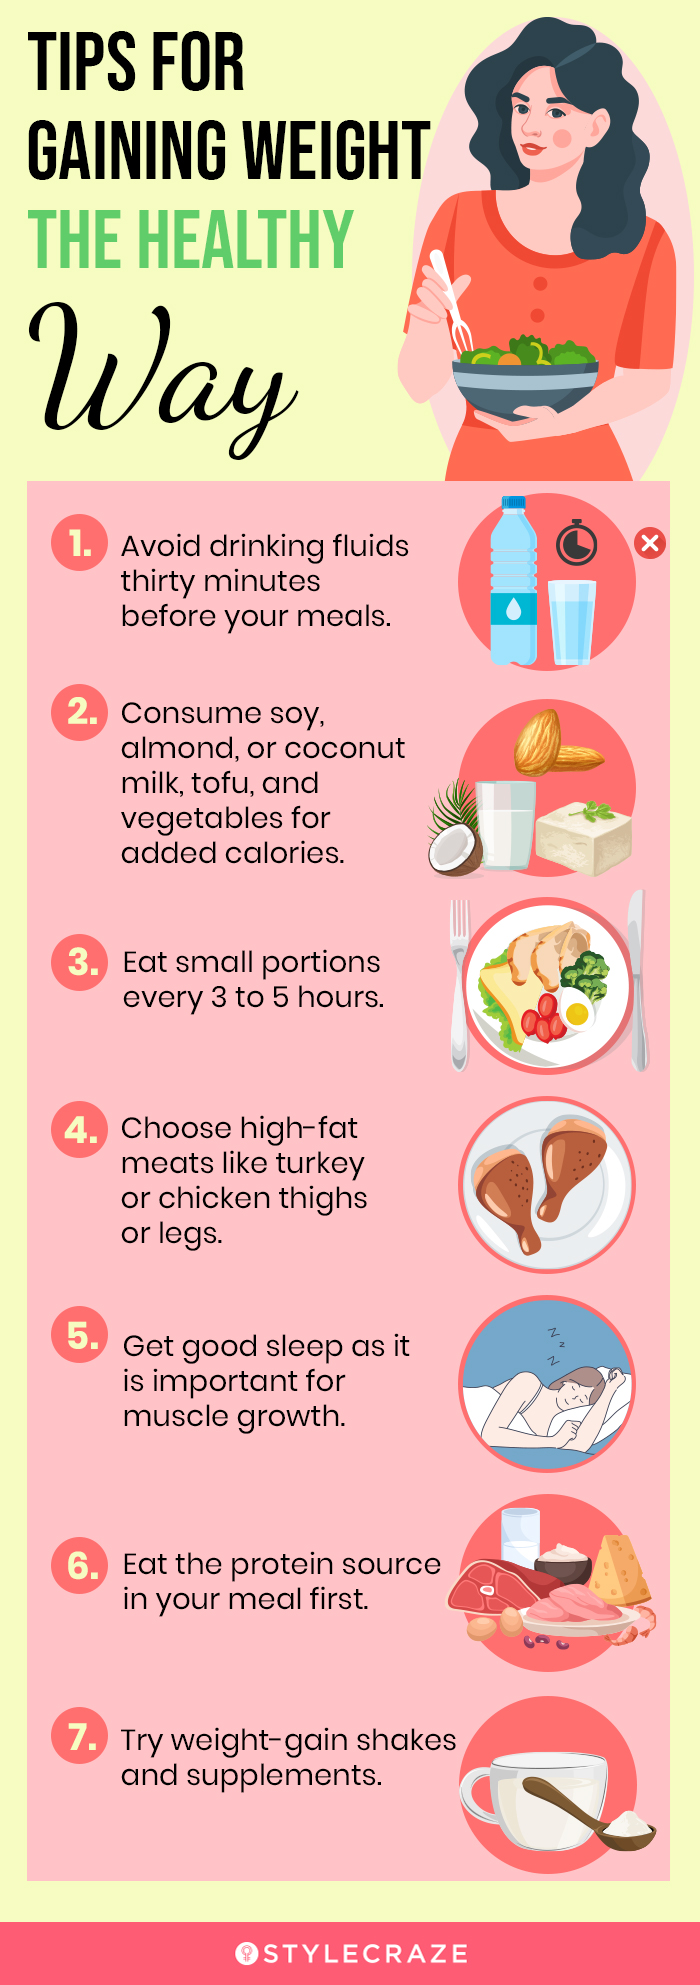 Tips for Healthy Weight Gain